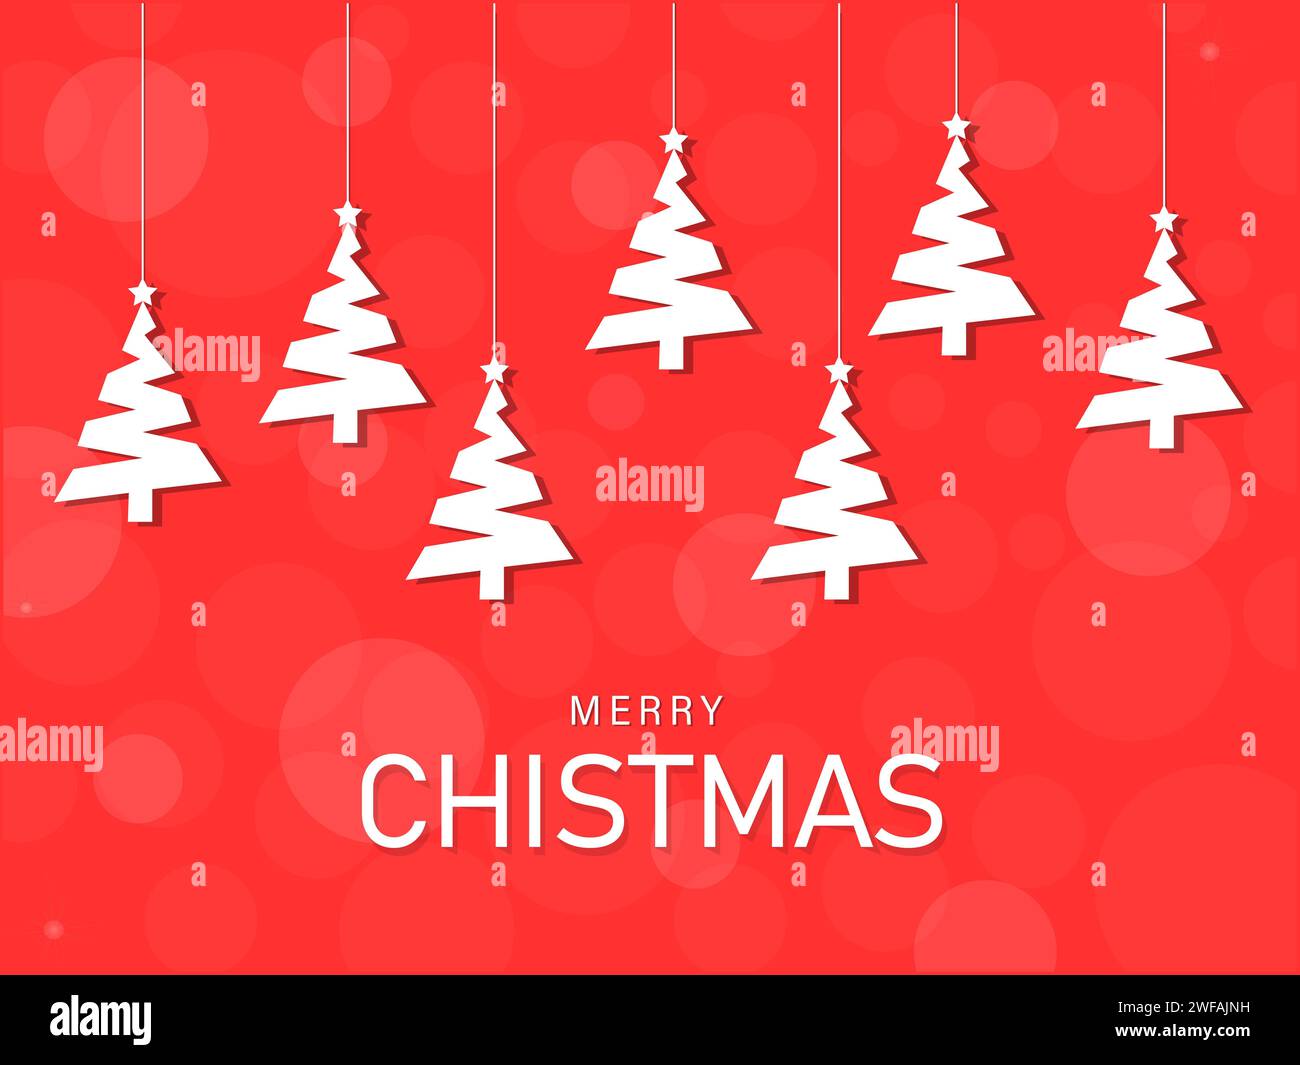 White Christmas trees hanging over a red background with festive greetings Stock Photo